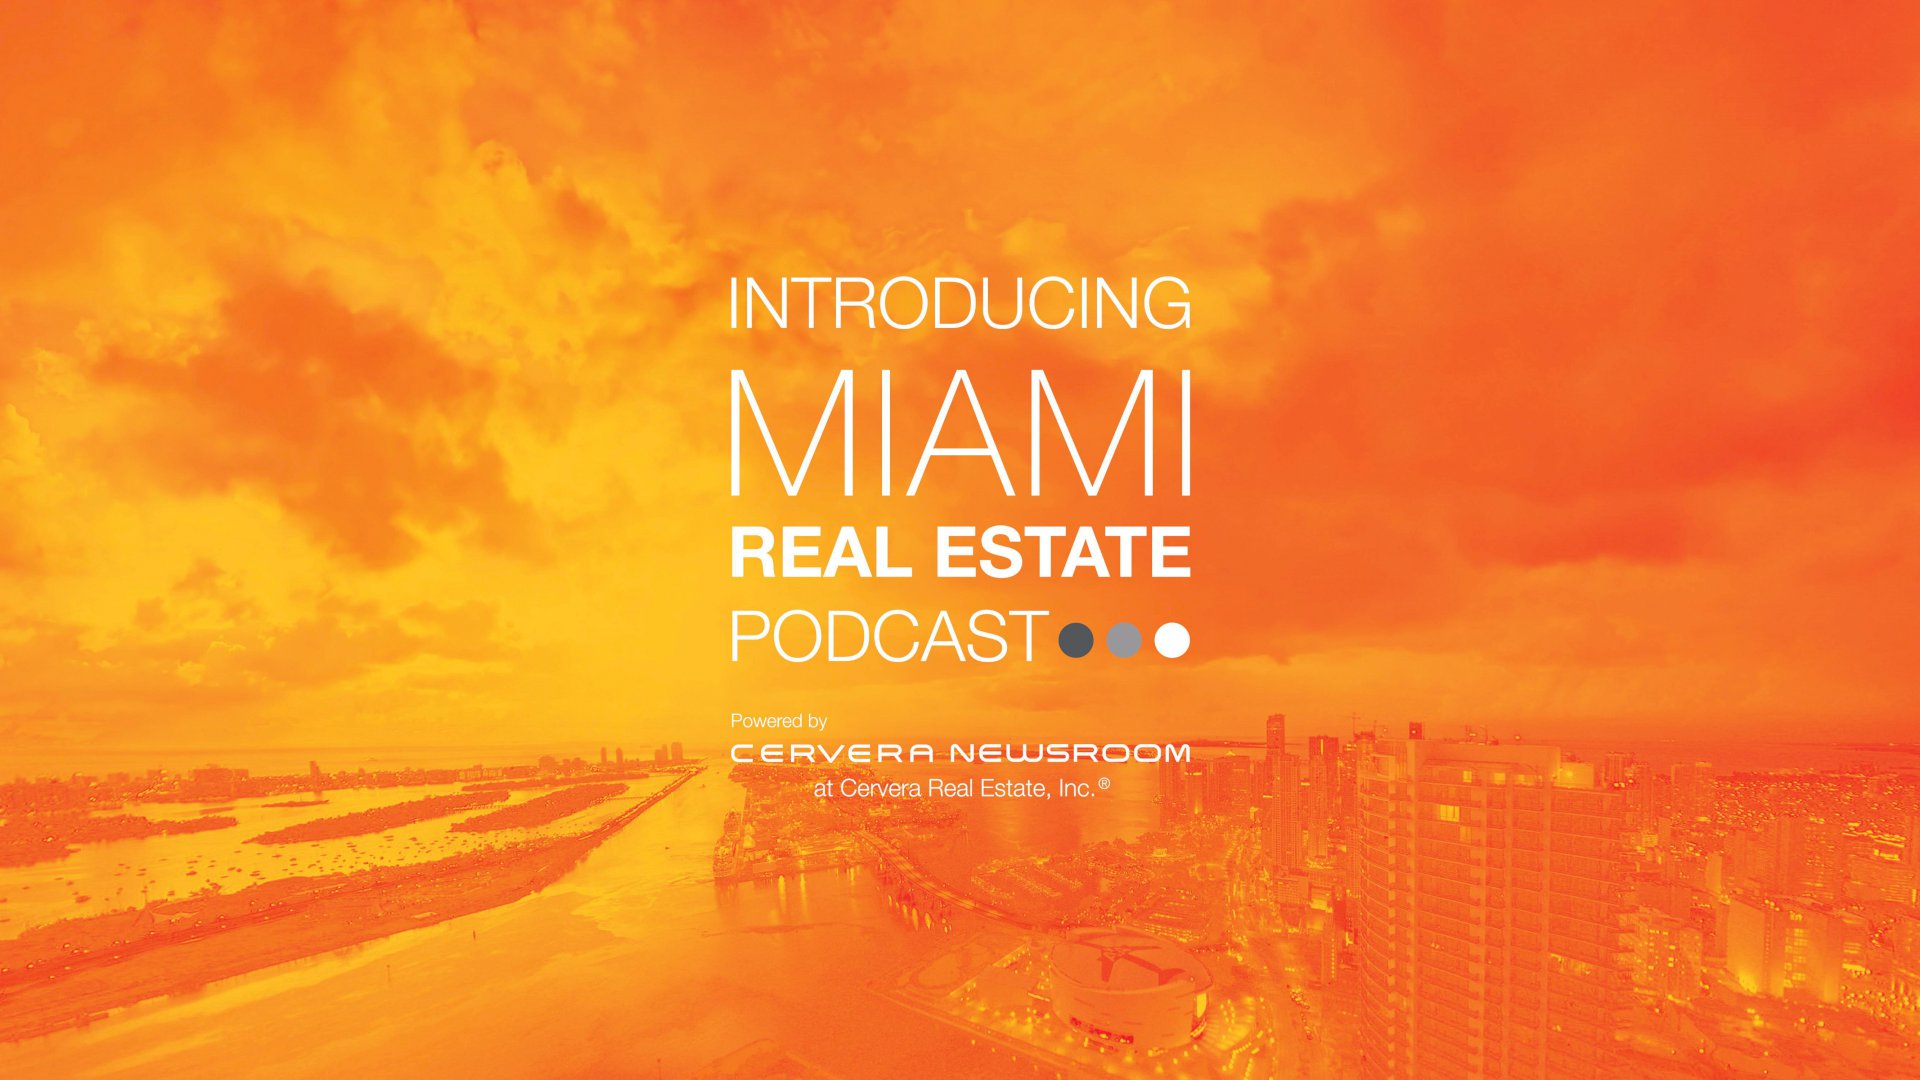 Introducing the Miami Real Estate Podcast